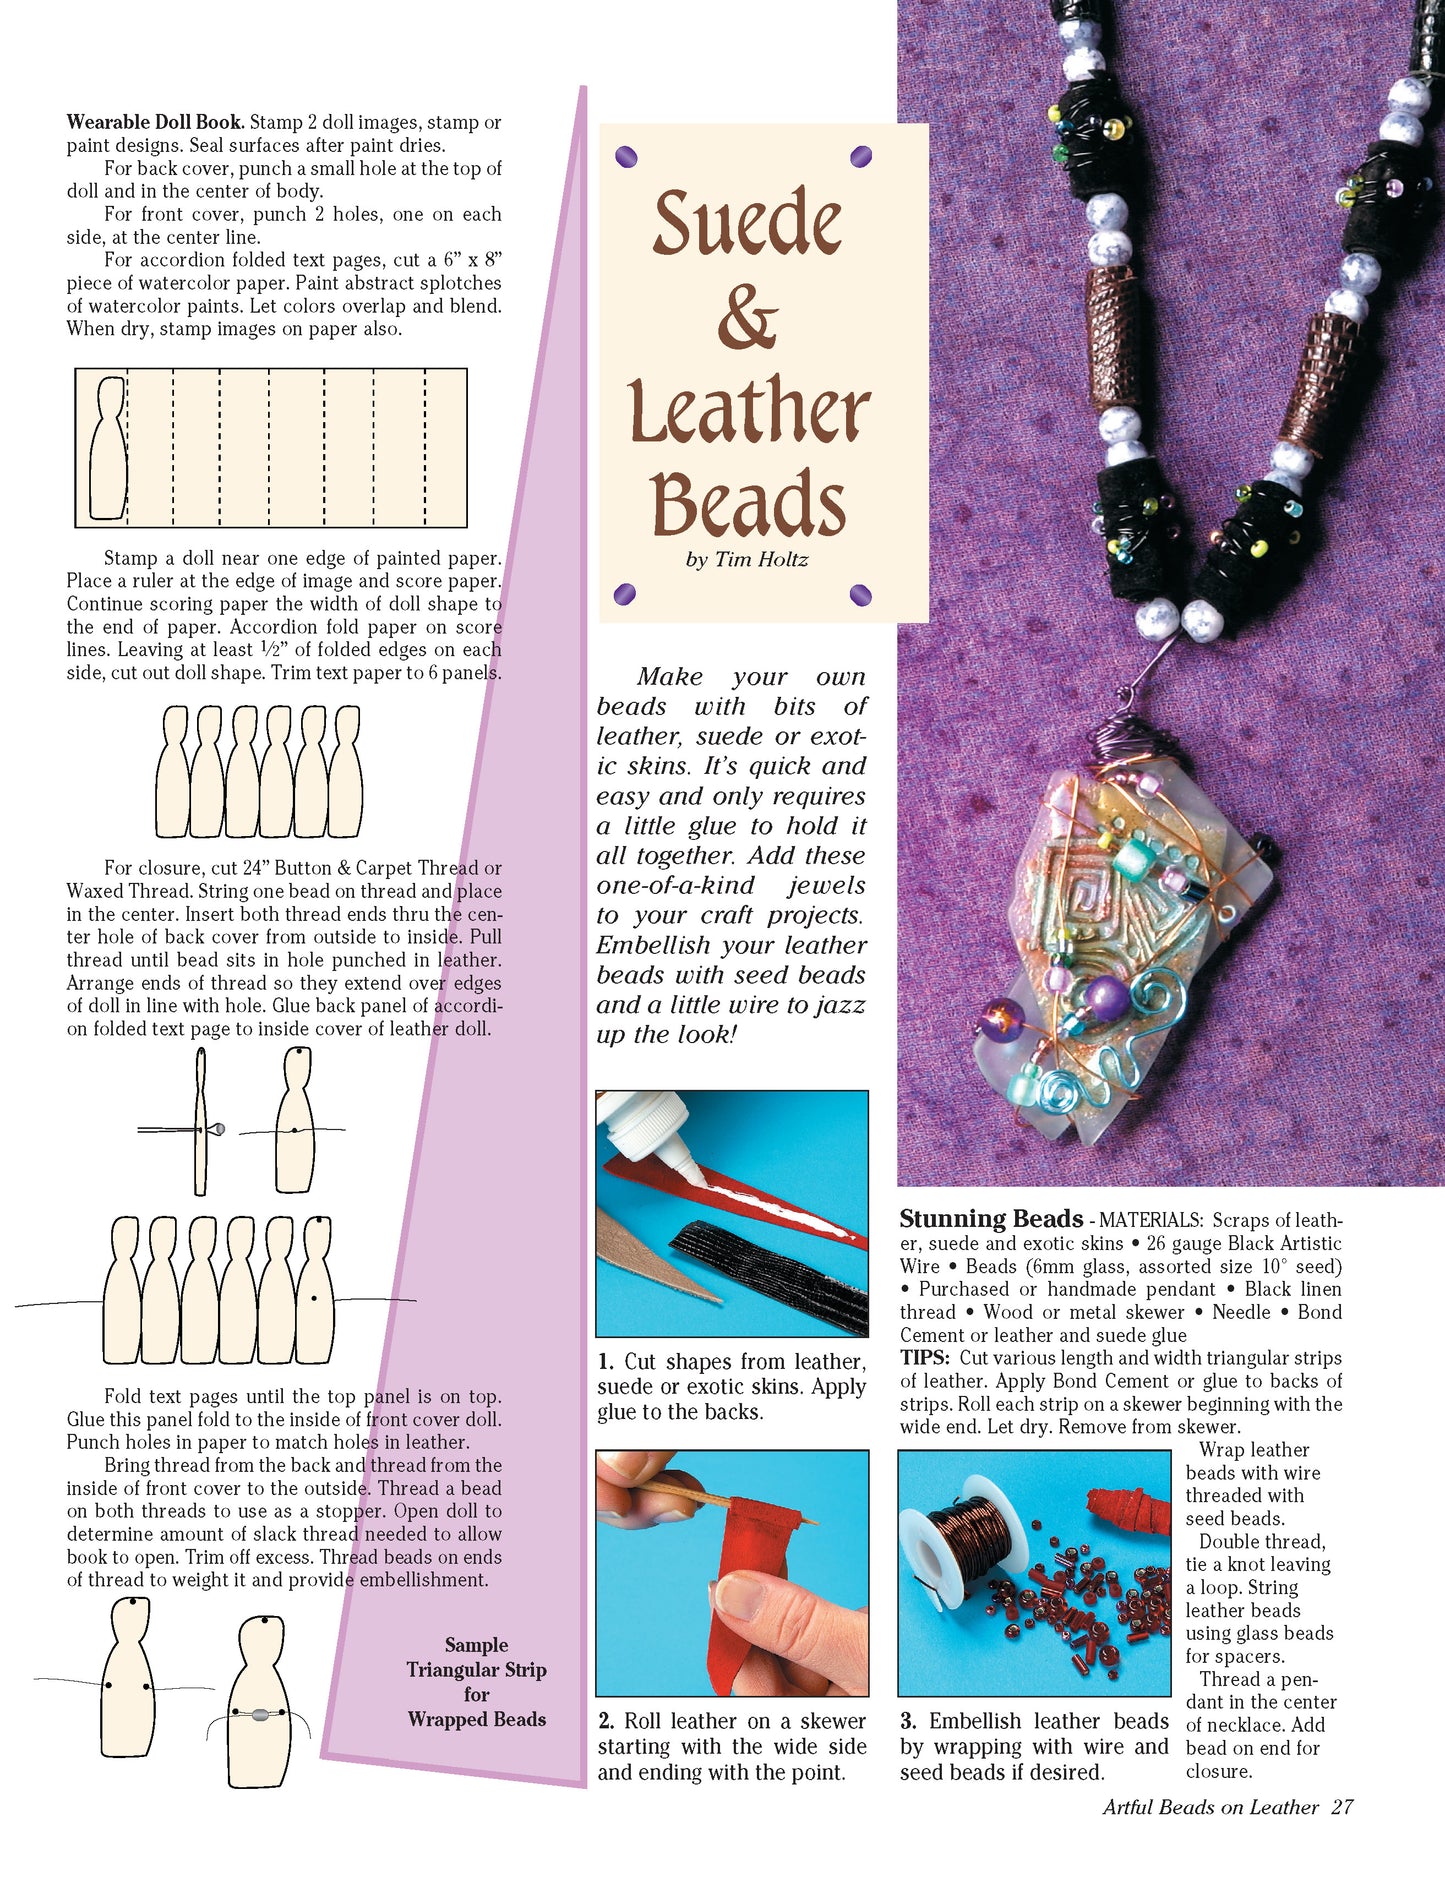 Artful Beads on Leather